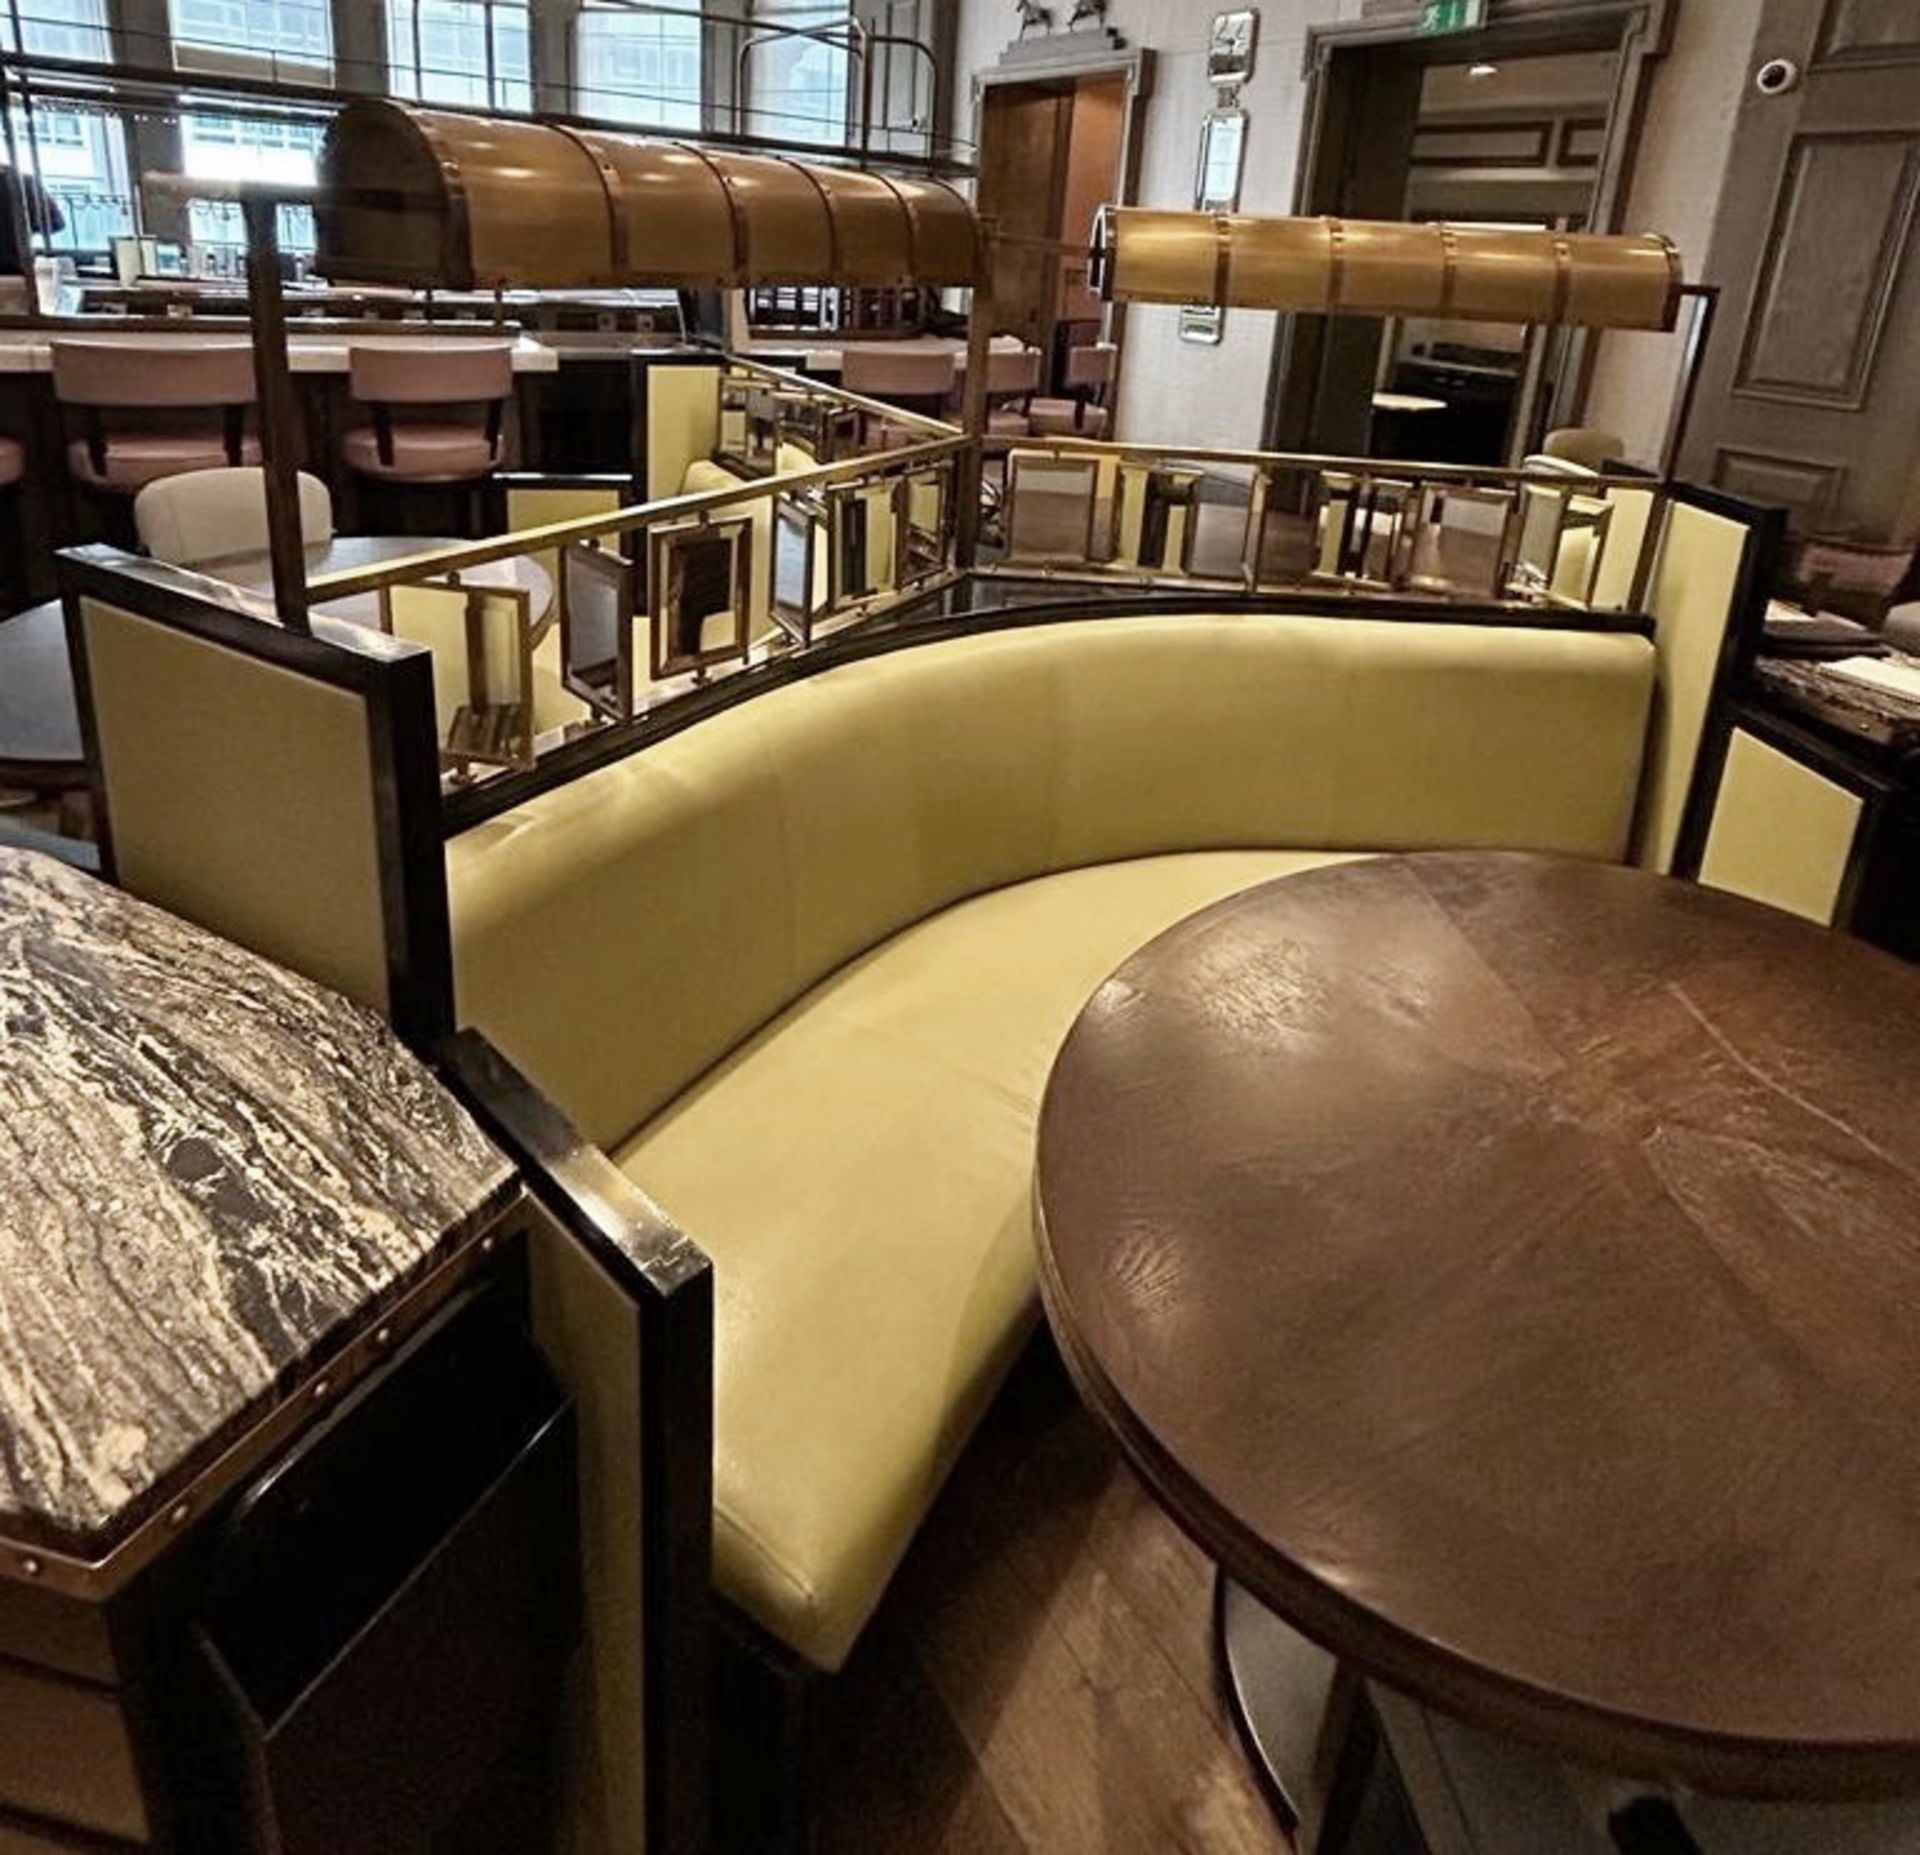 1 x Luxury Commercial Star-shaped Banquet Seating - Situated in an Exclusive Gourmet Restaurant - Image 3 of 12